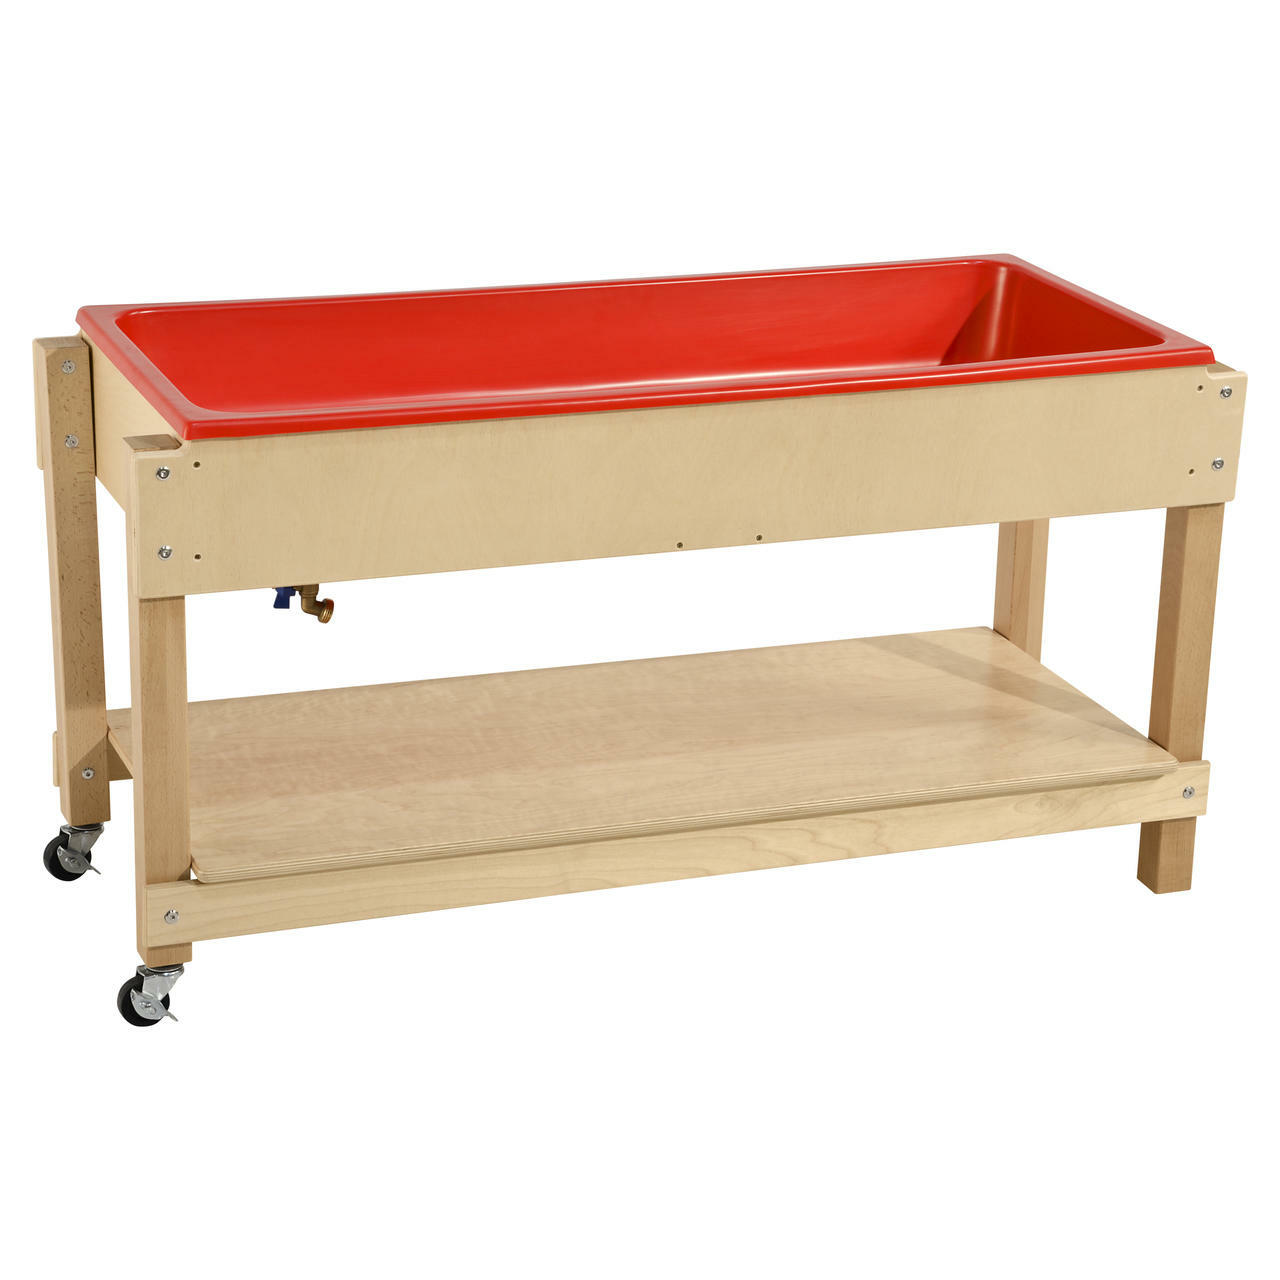 Wood Designs Sand and Water Table with Lid/Shelf - (11810) - SchoolOutlet